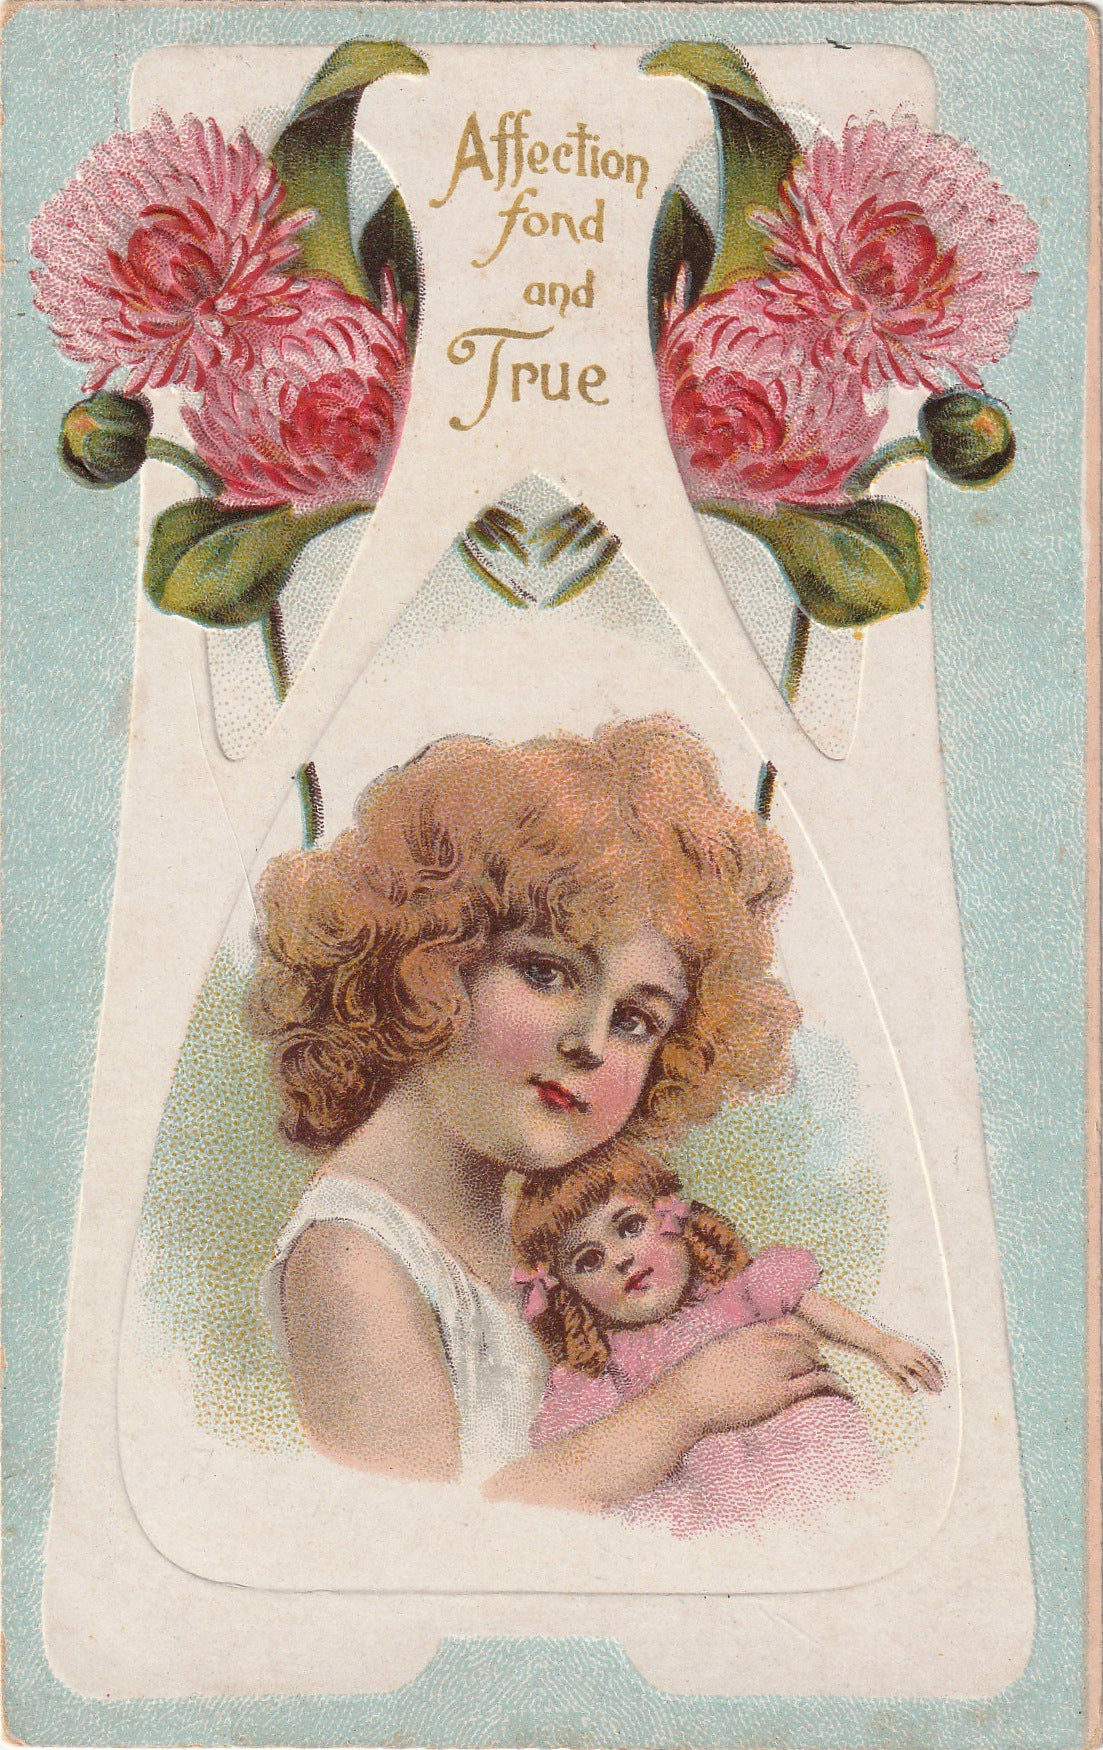 Affection Fond and True - Girl with Doll - Valentine Postcard, c. 1900 –  Ephemera Obscura Collection